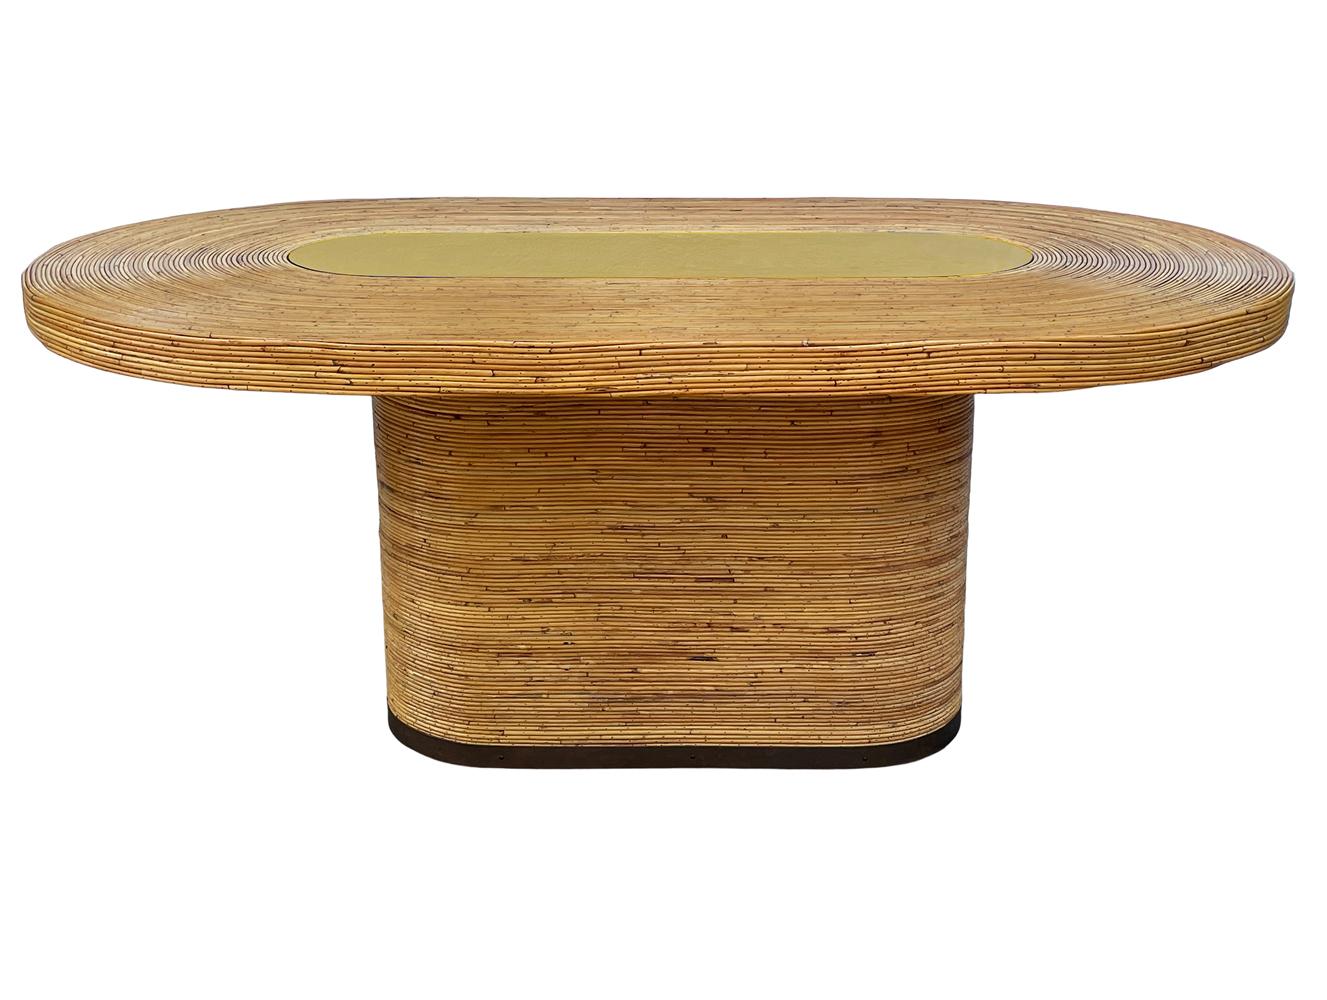 Mid-20th Century Mid-Century Modern Oval Dining Table in Bamboo & Brass For Sale